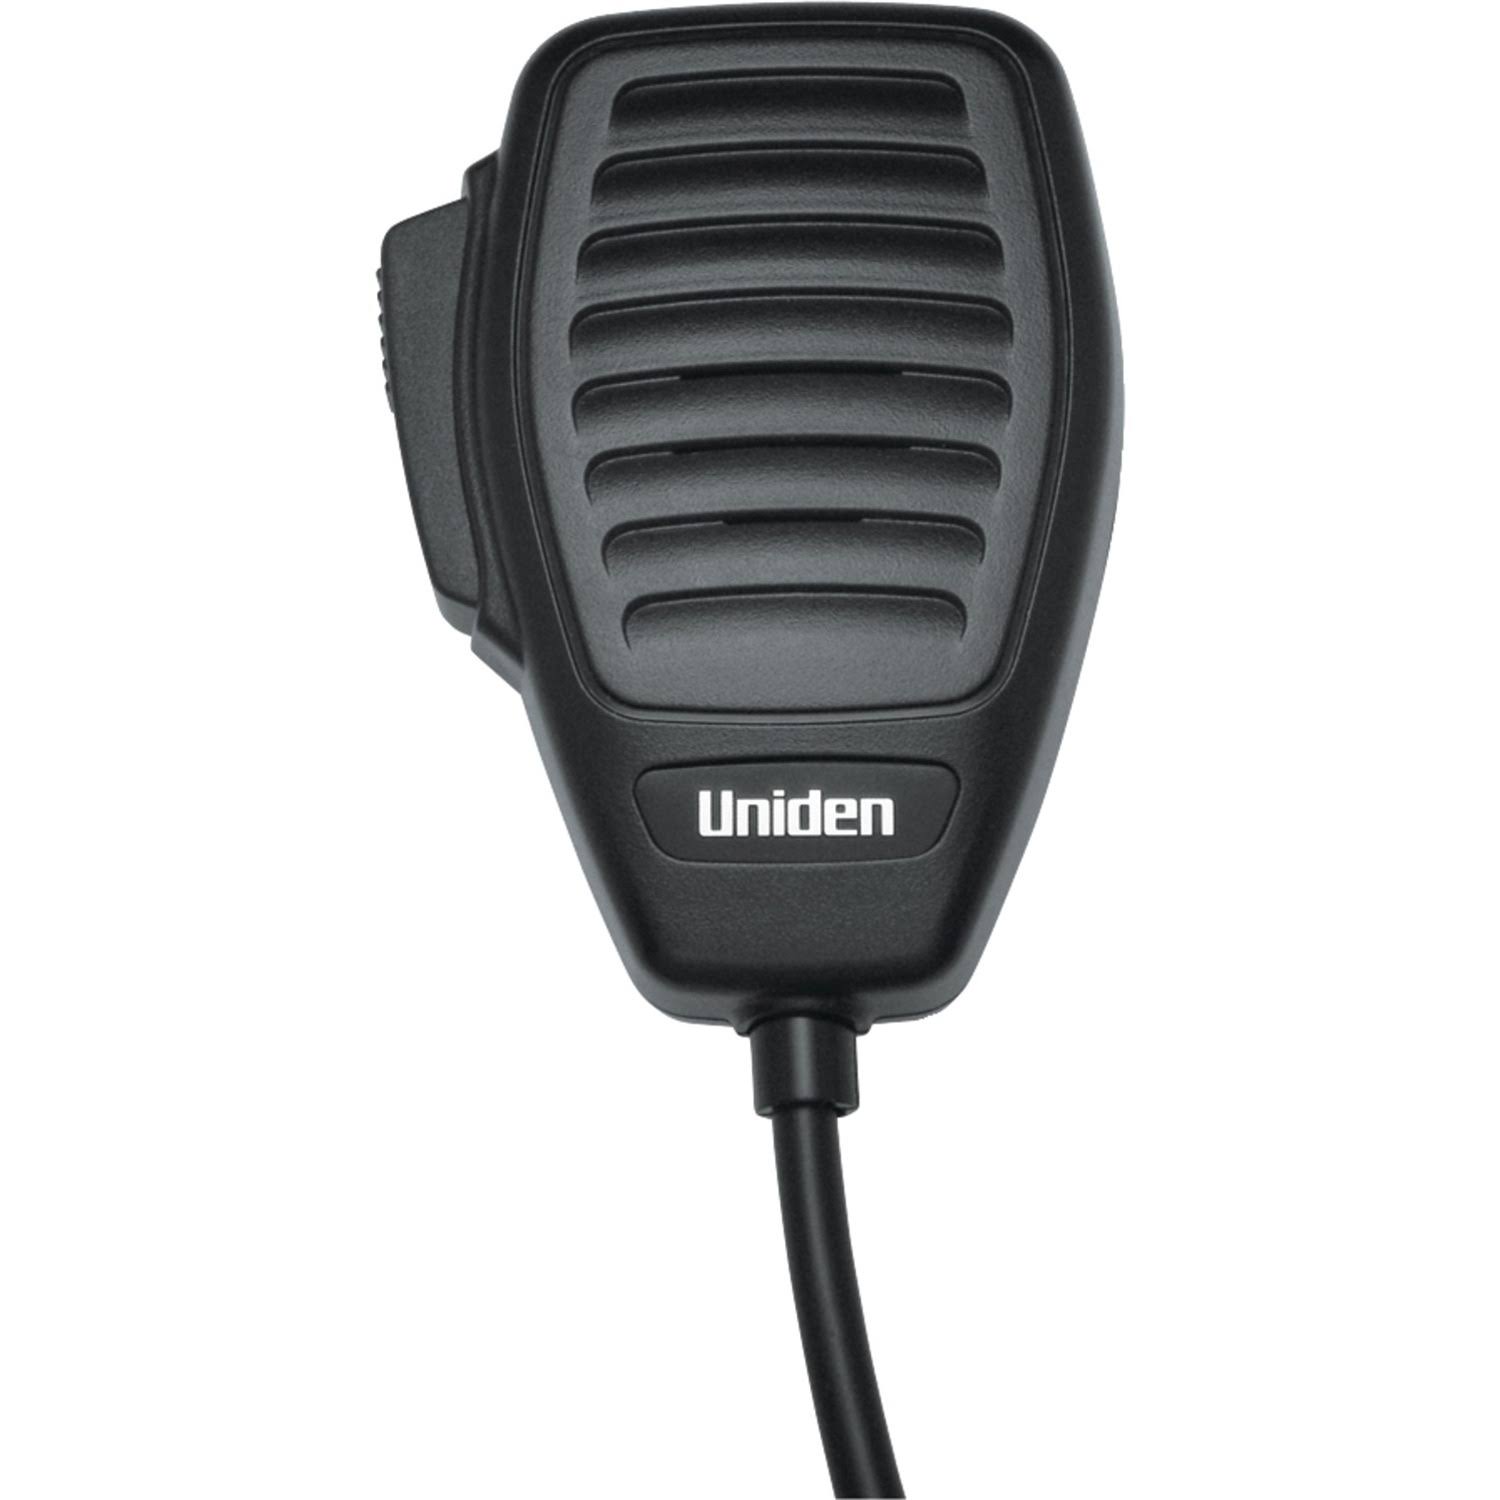 Uniden BC645 Replacement Microphone - for CB Radios, 4 Pin